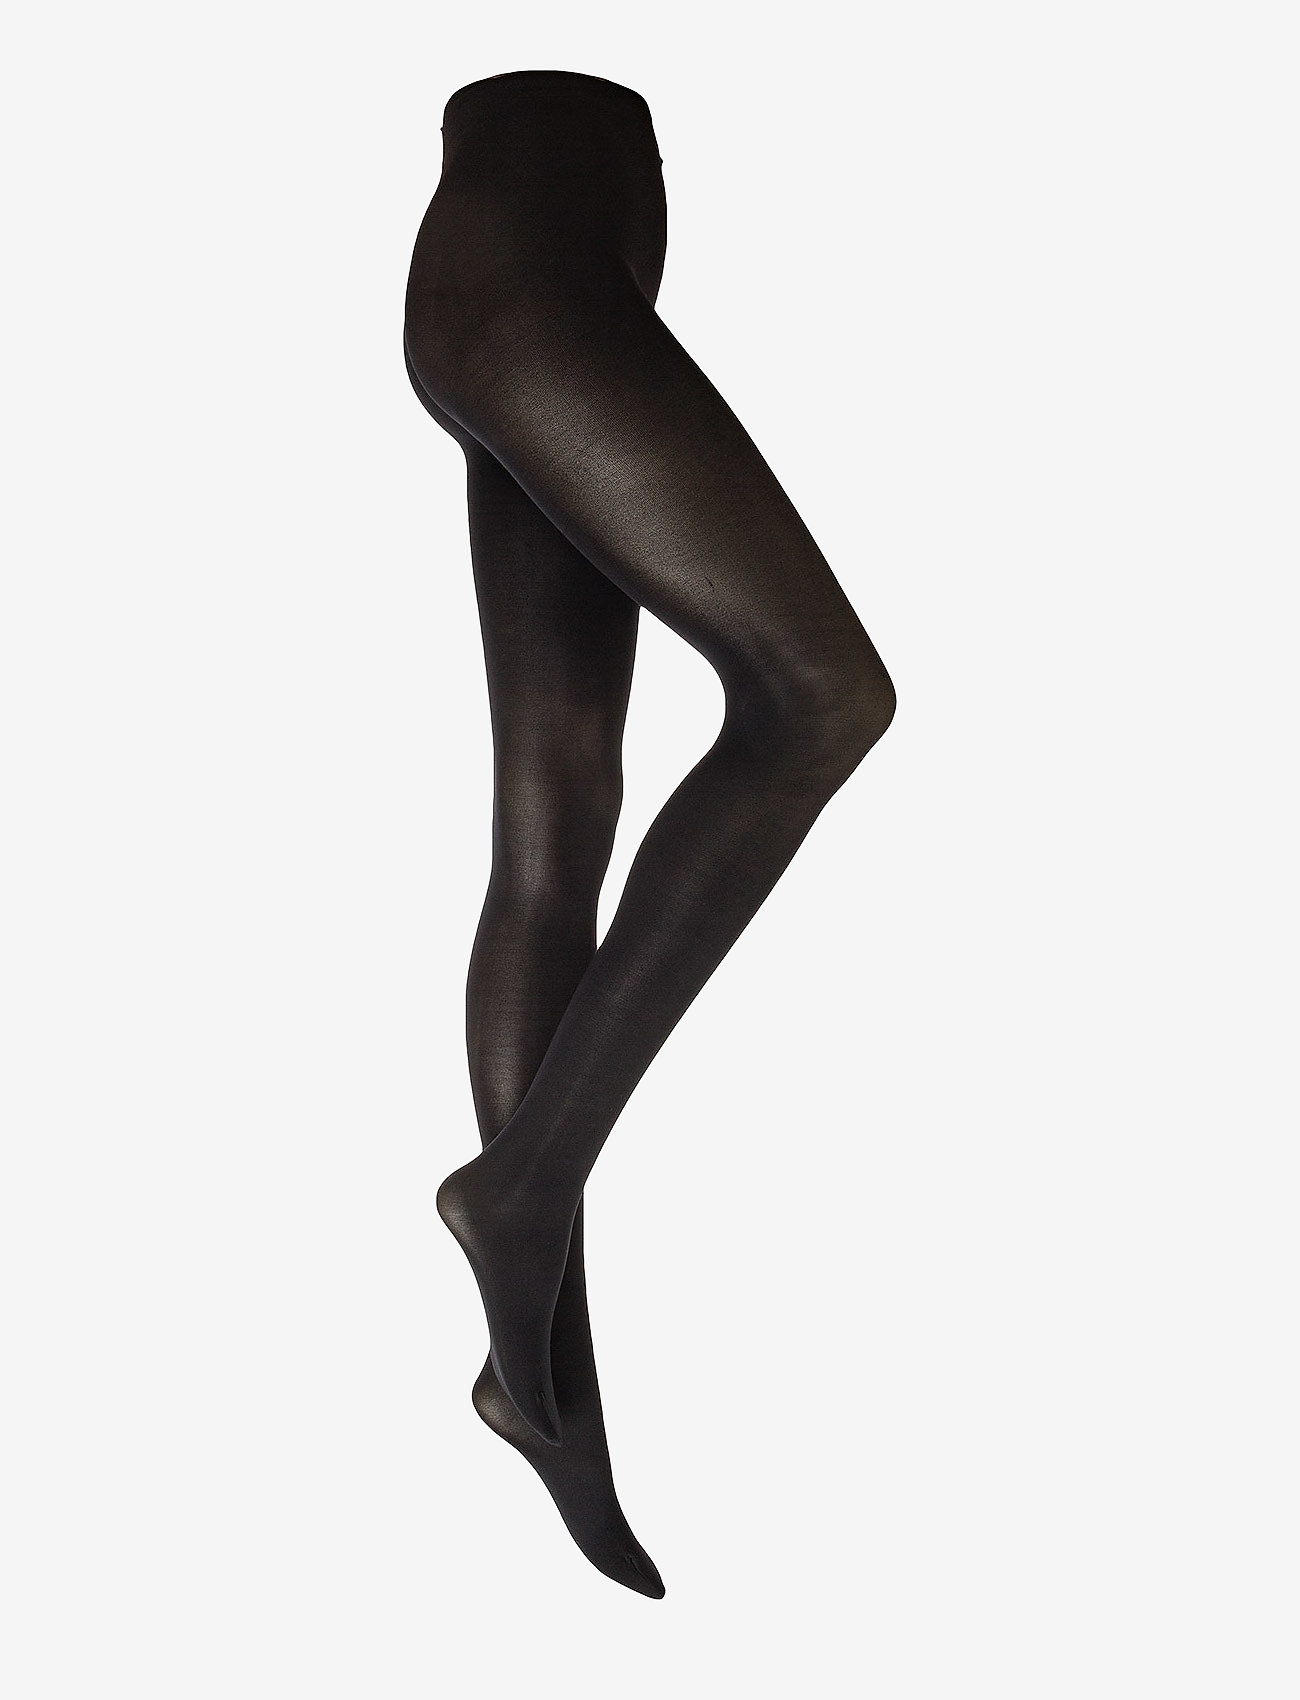 Cream - Madonna tights - lowest prices - pitch black - 0